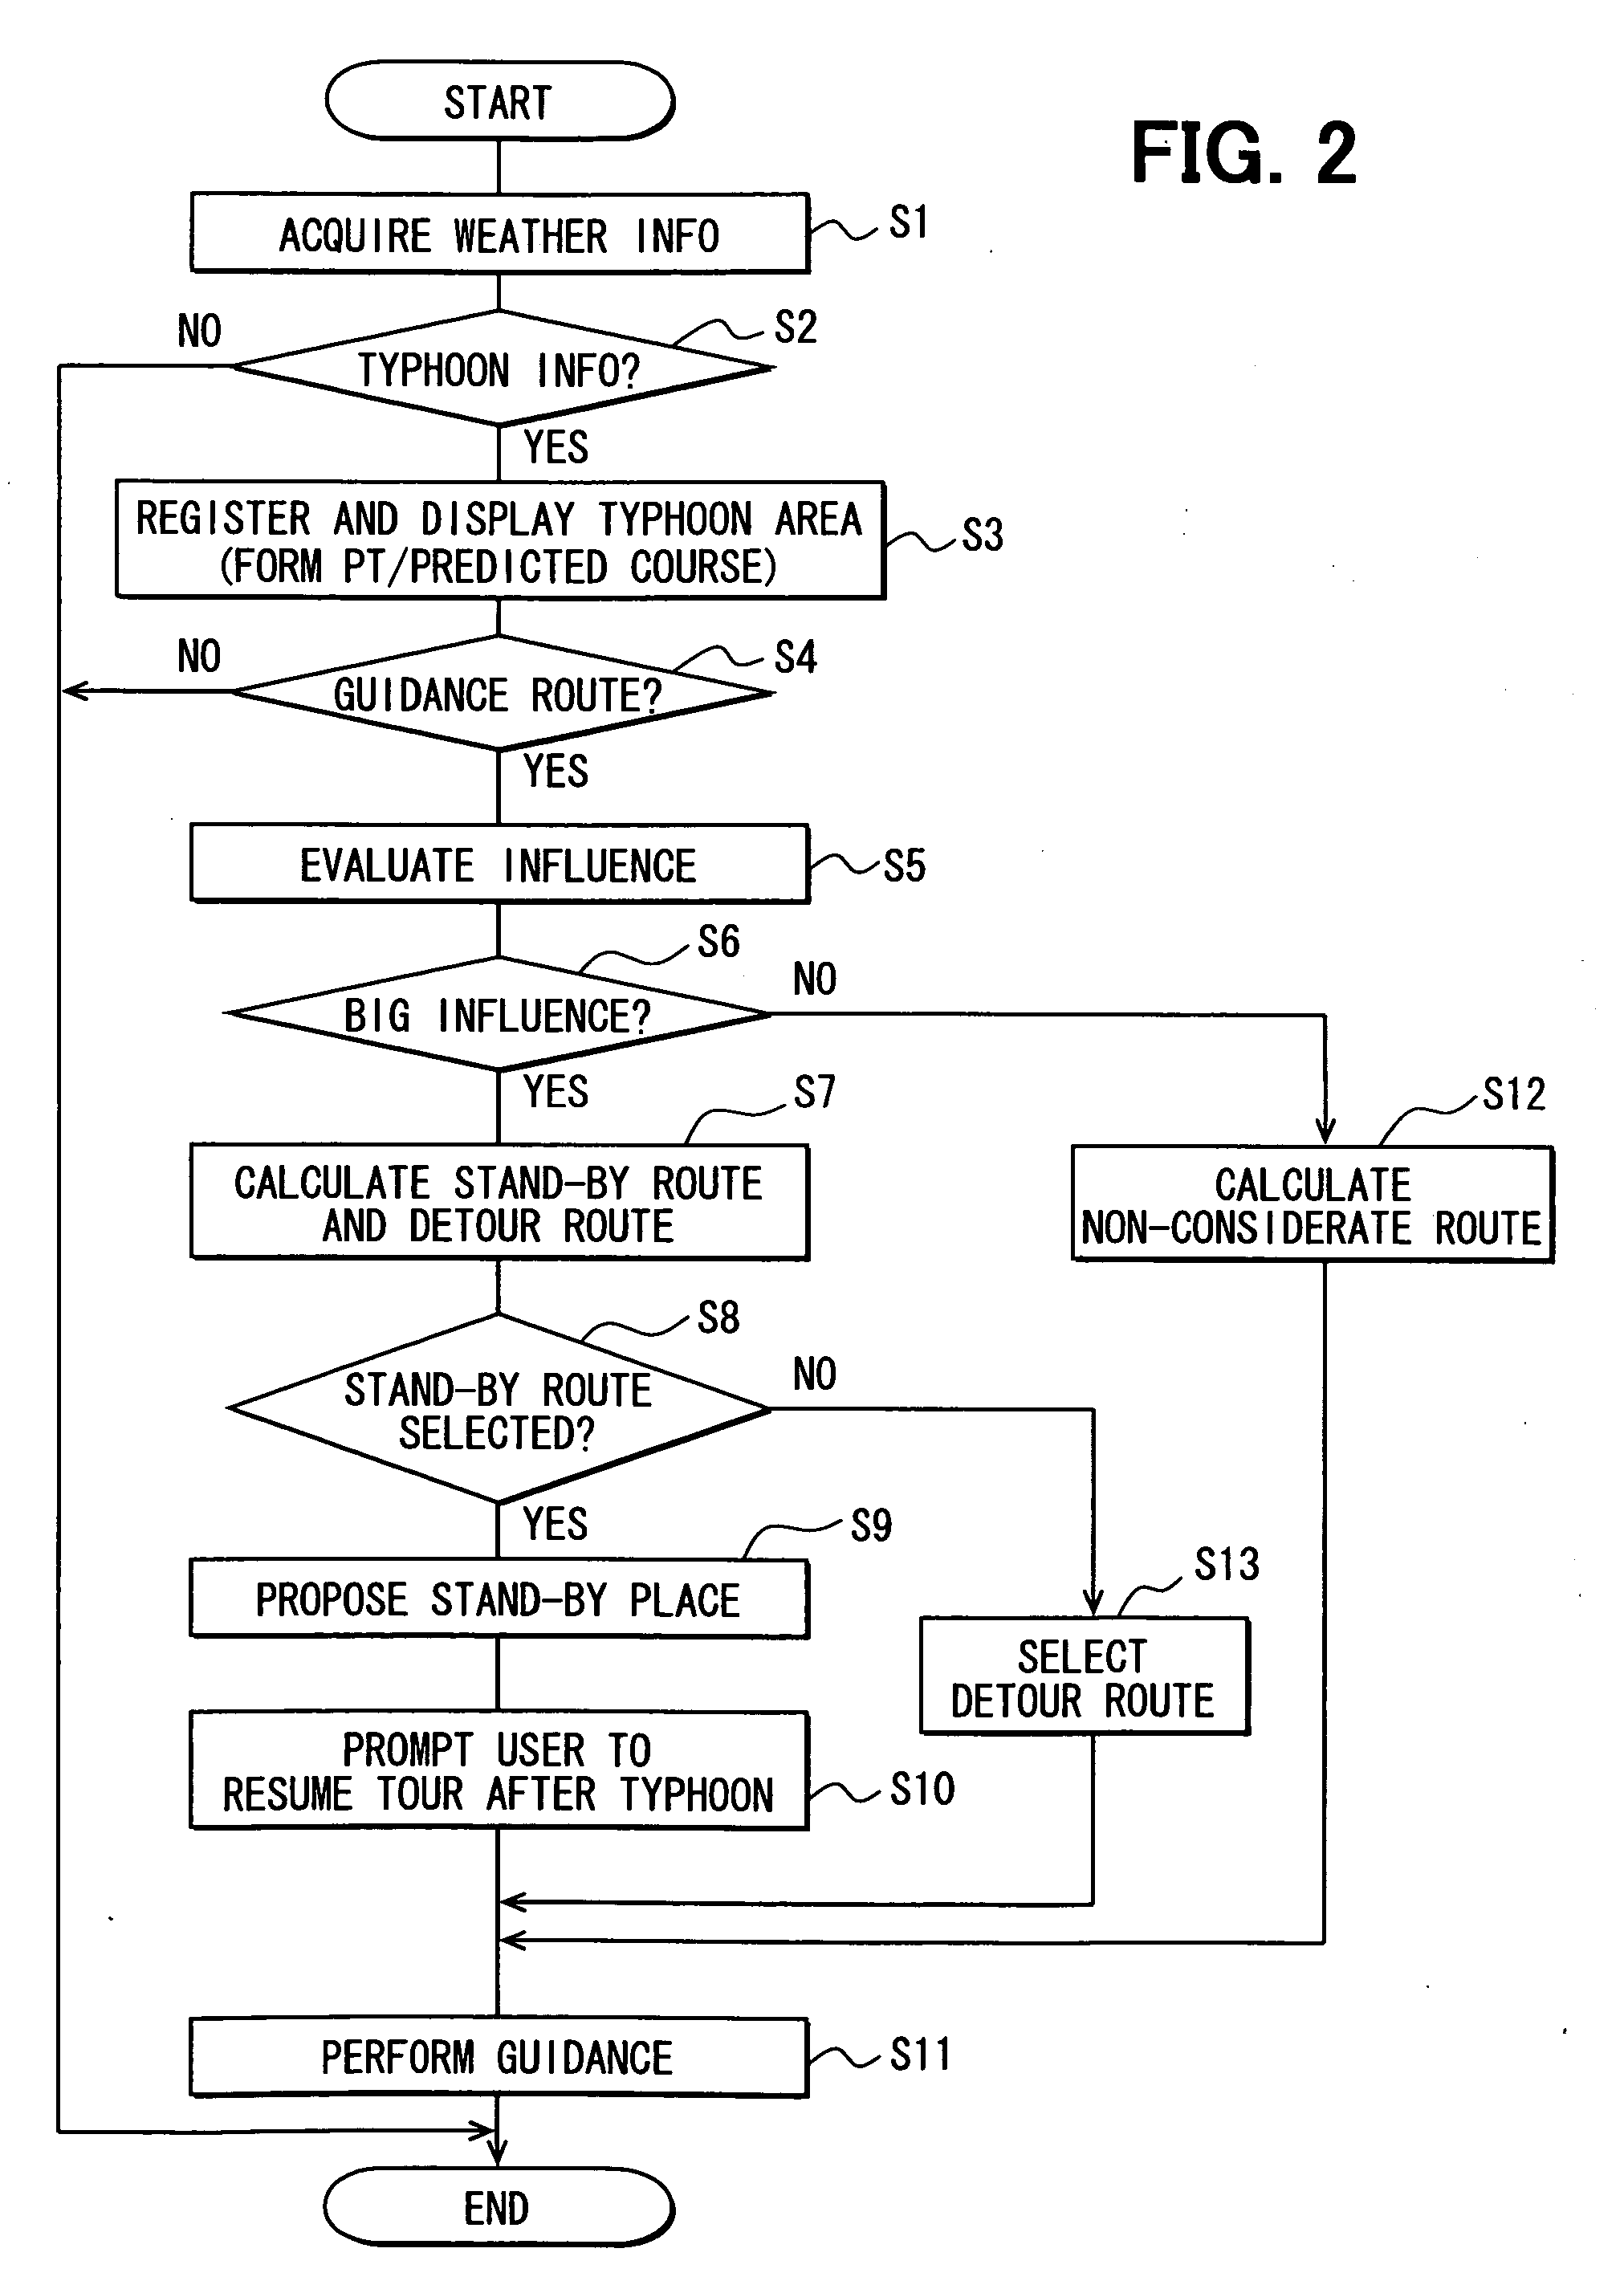 Apparatus for providing guidance route